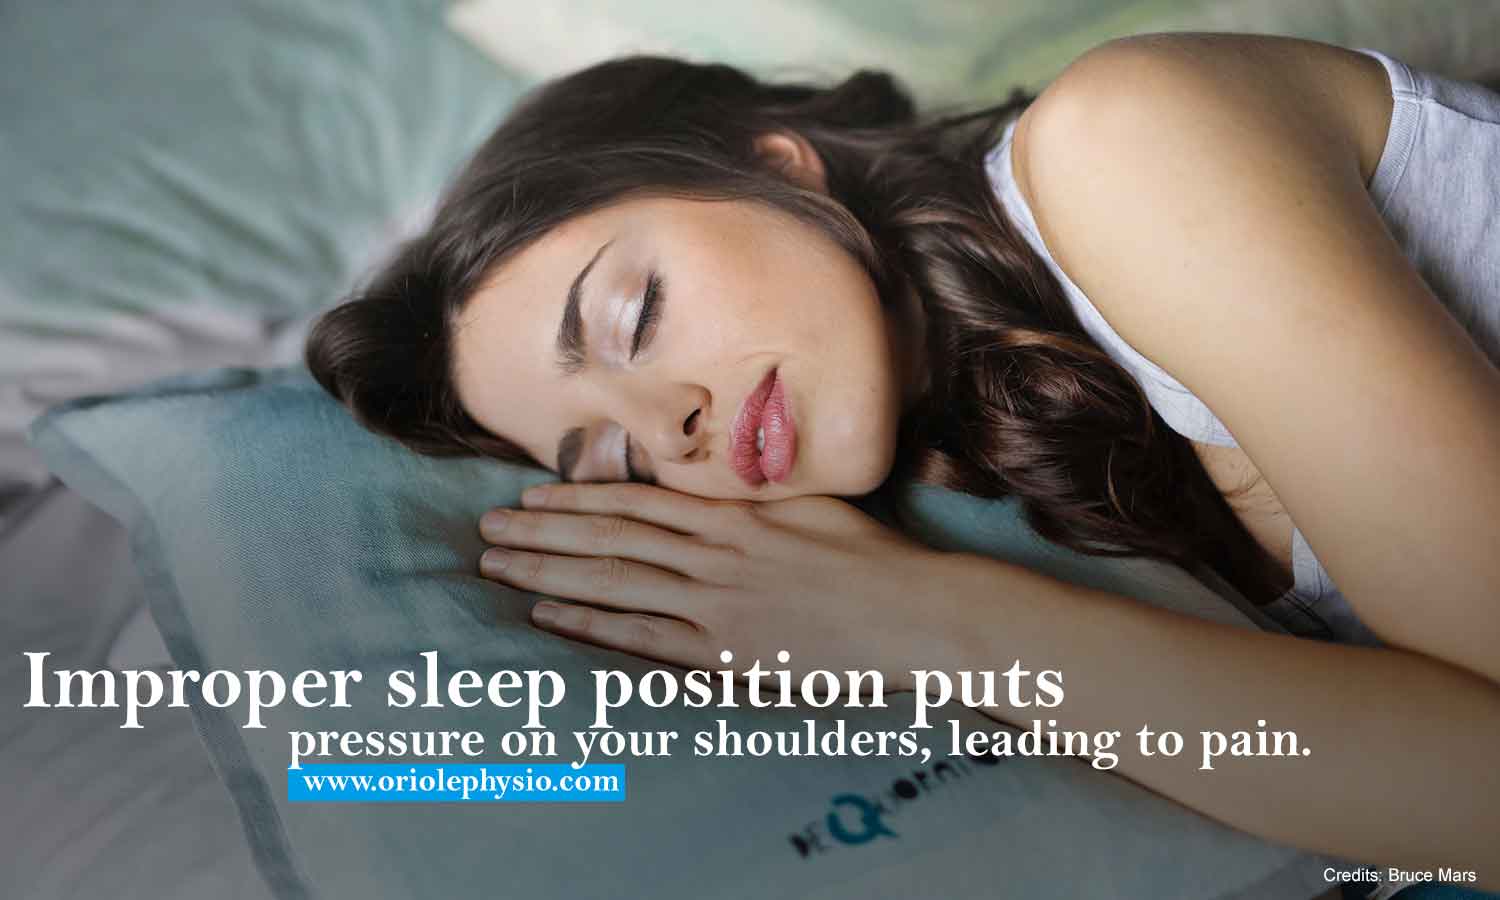 Improper sleep position puts pressure on your shoulders, leading to pain.